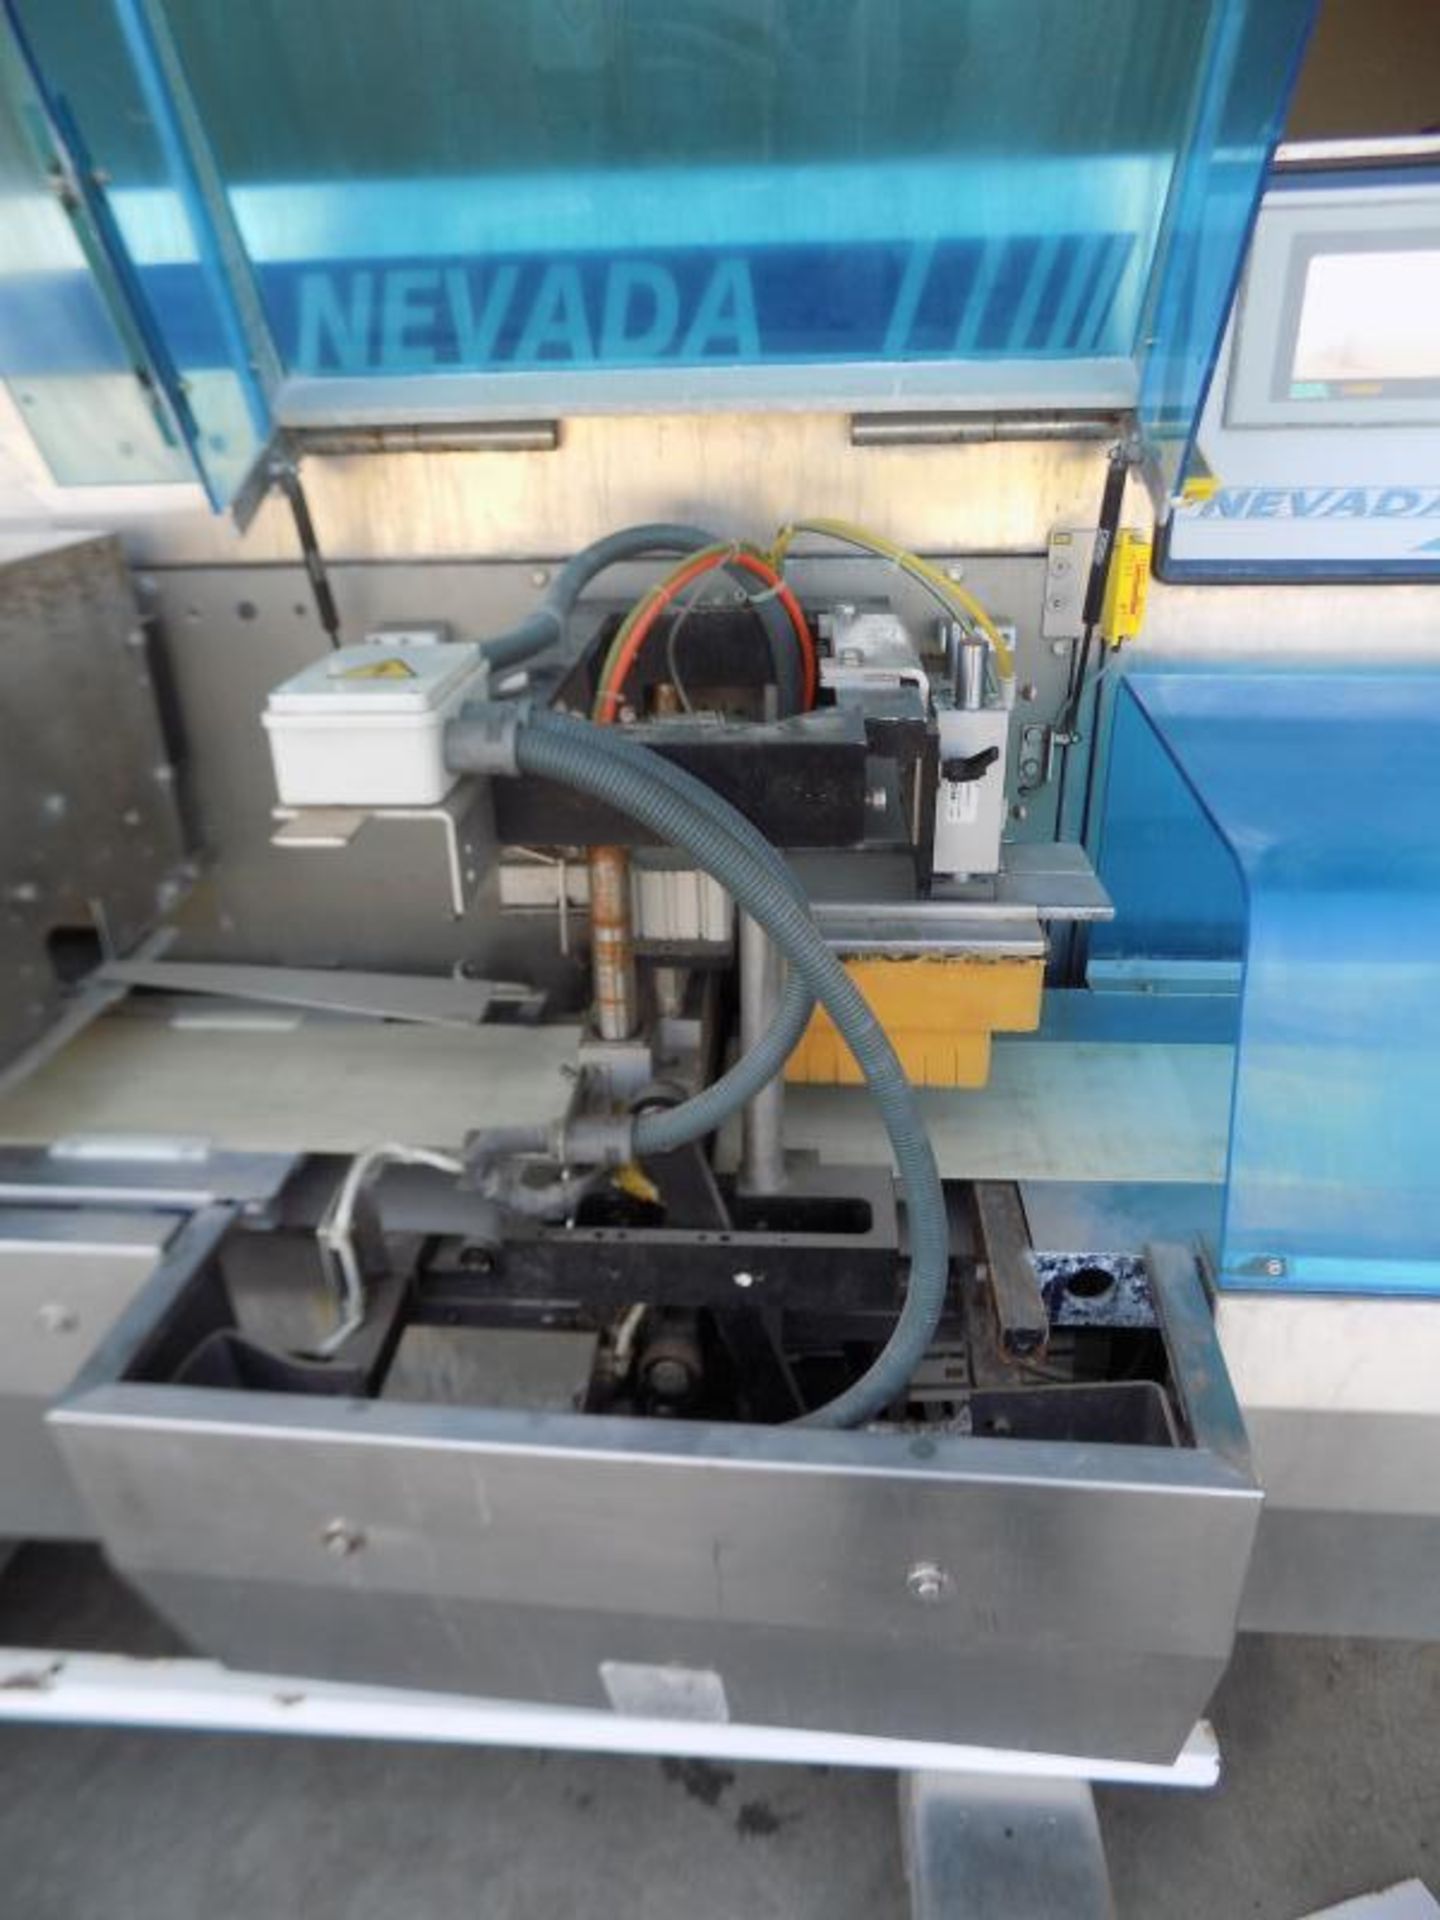 2004 Ulma Nevada LS Horizontal Flow Wrapper, S/N 1600022 with Reels for Film, Control Panel VT565W - Image 3 of 7